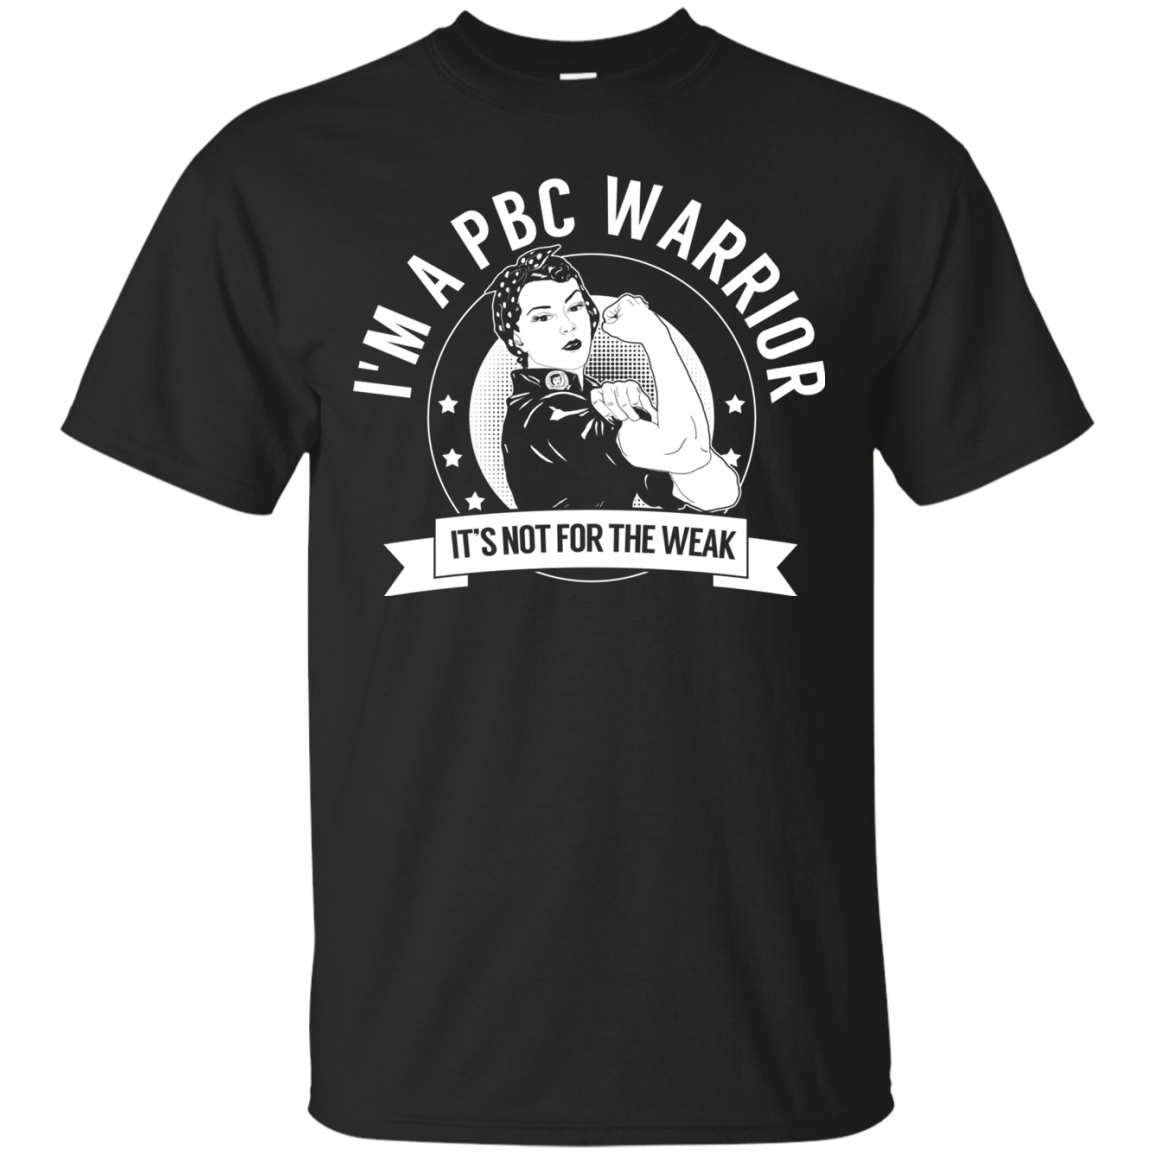 Primary Biliary Cirrhosis - PBC Warrior NFTW Unisex Shirt - The Unchargeables